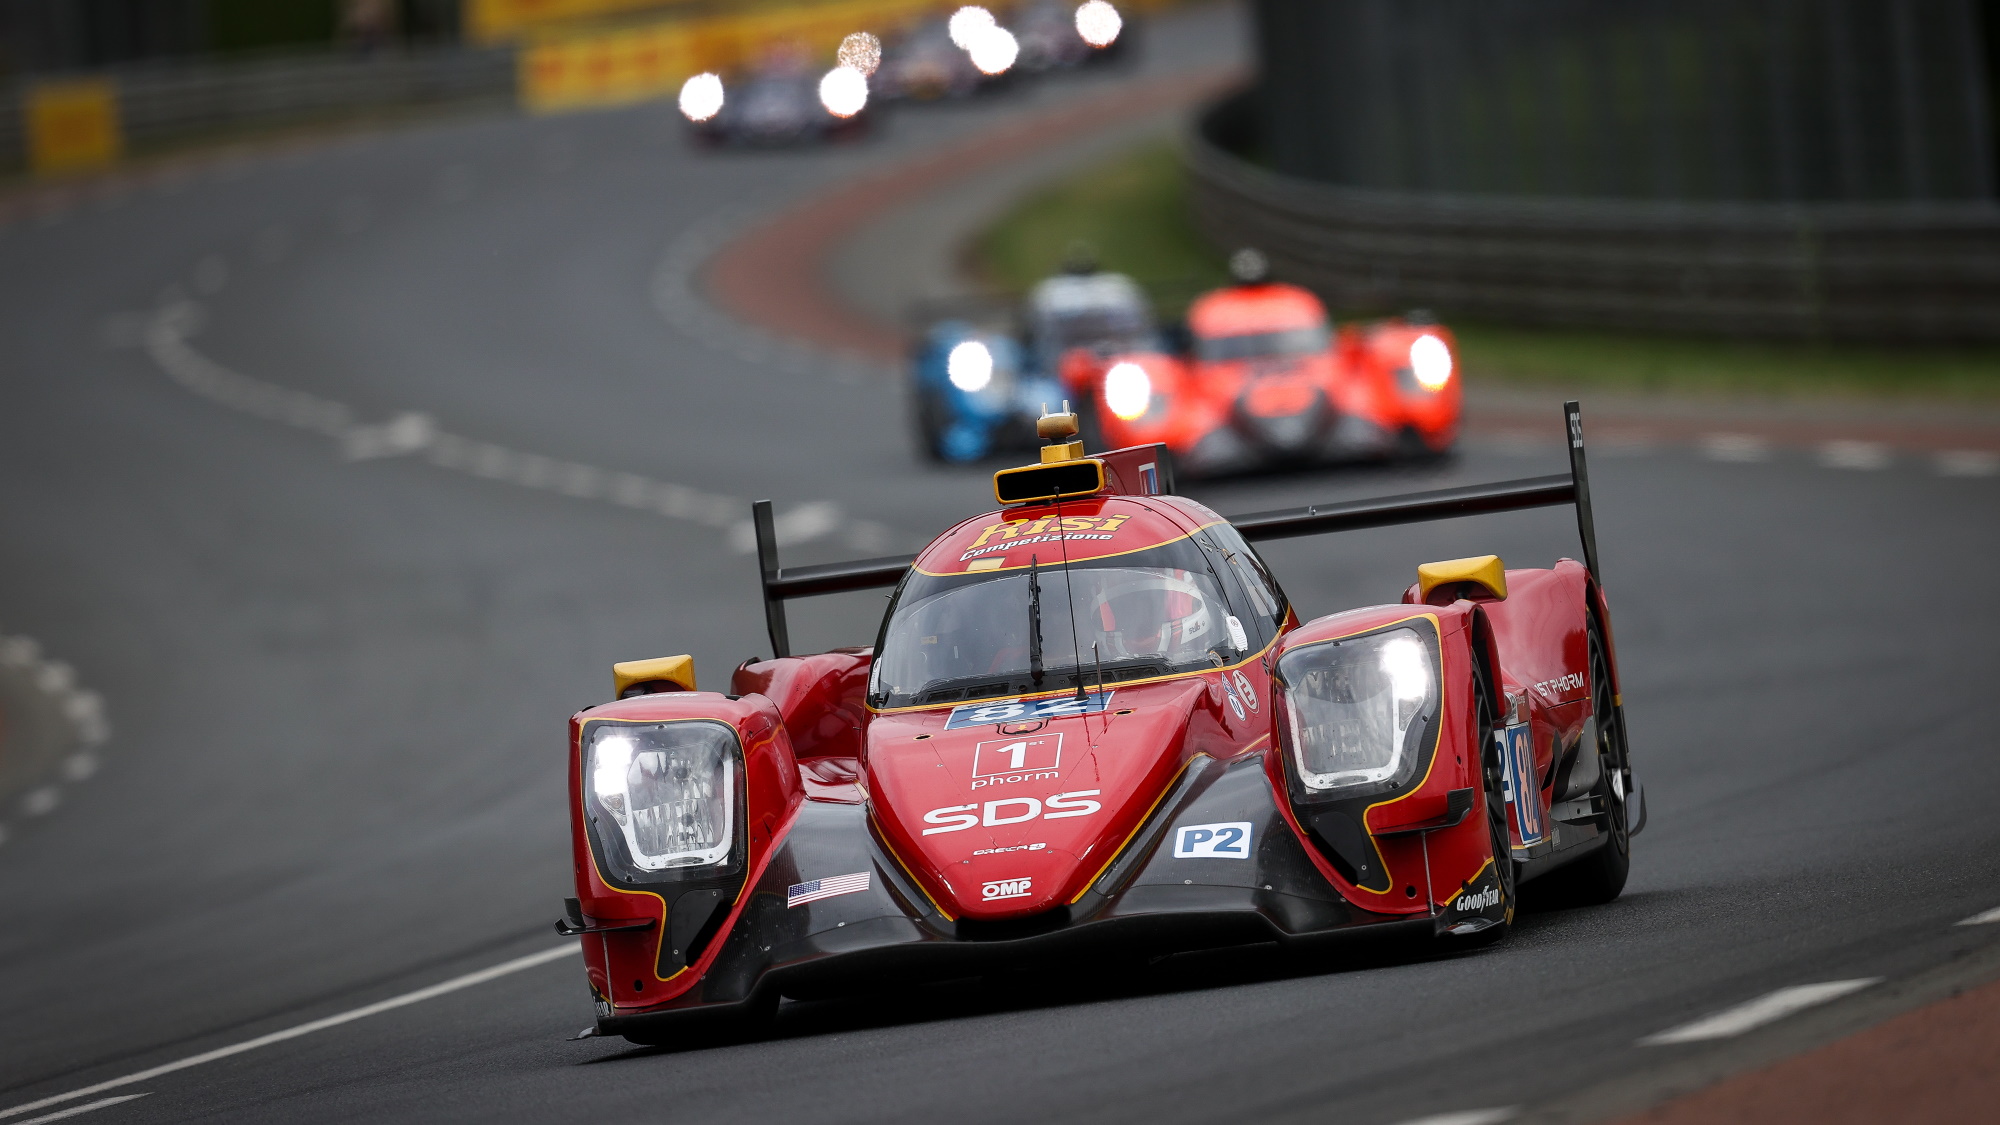 How to watch Le Mans live stream of the 24-hour race online from anywhere today TechRadar